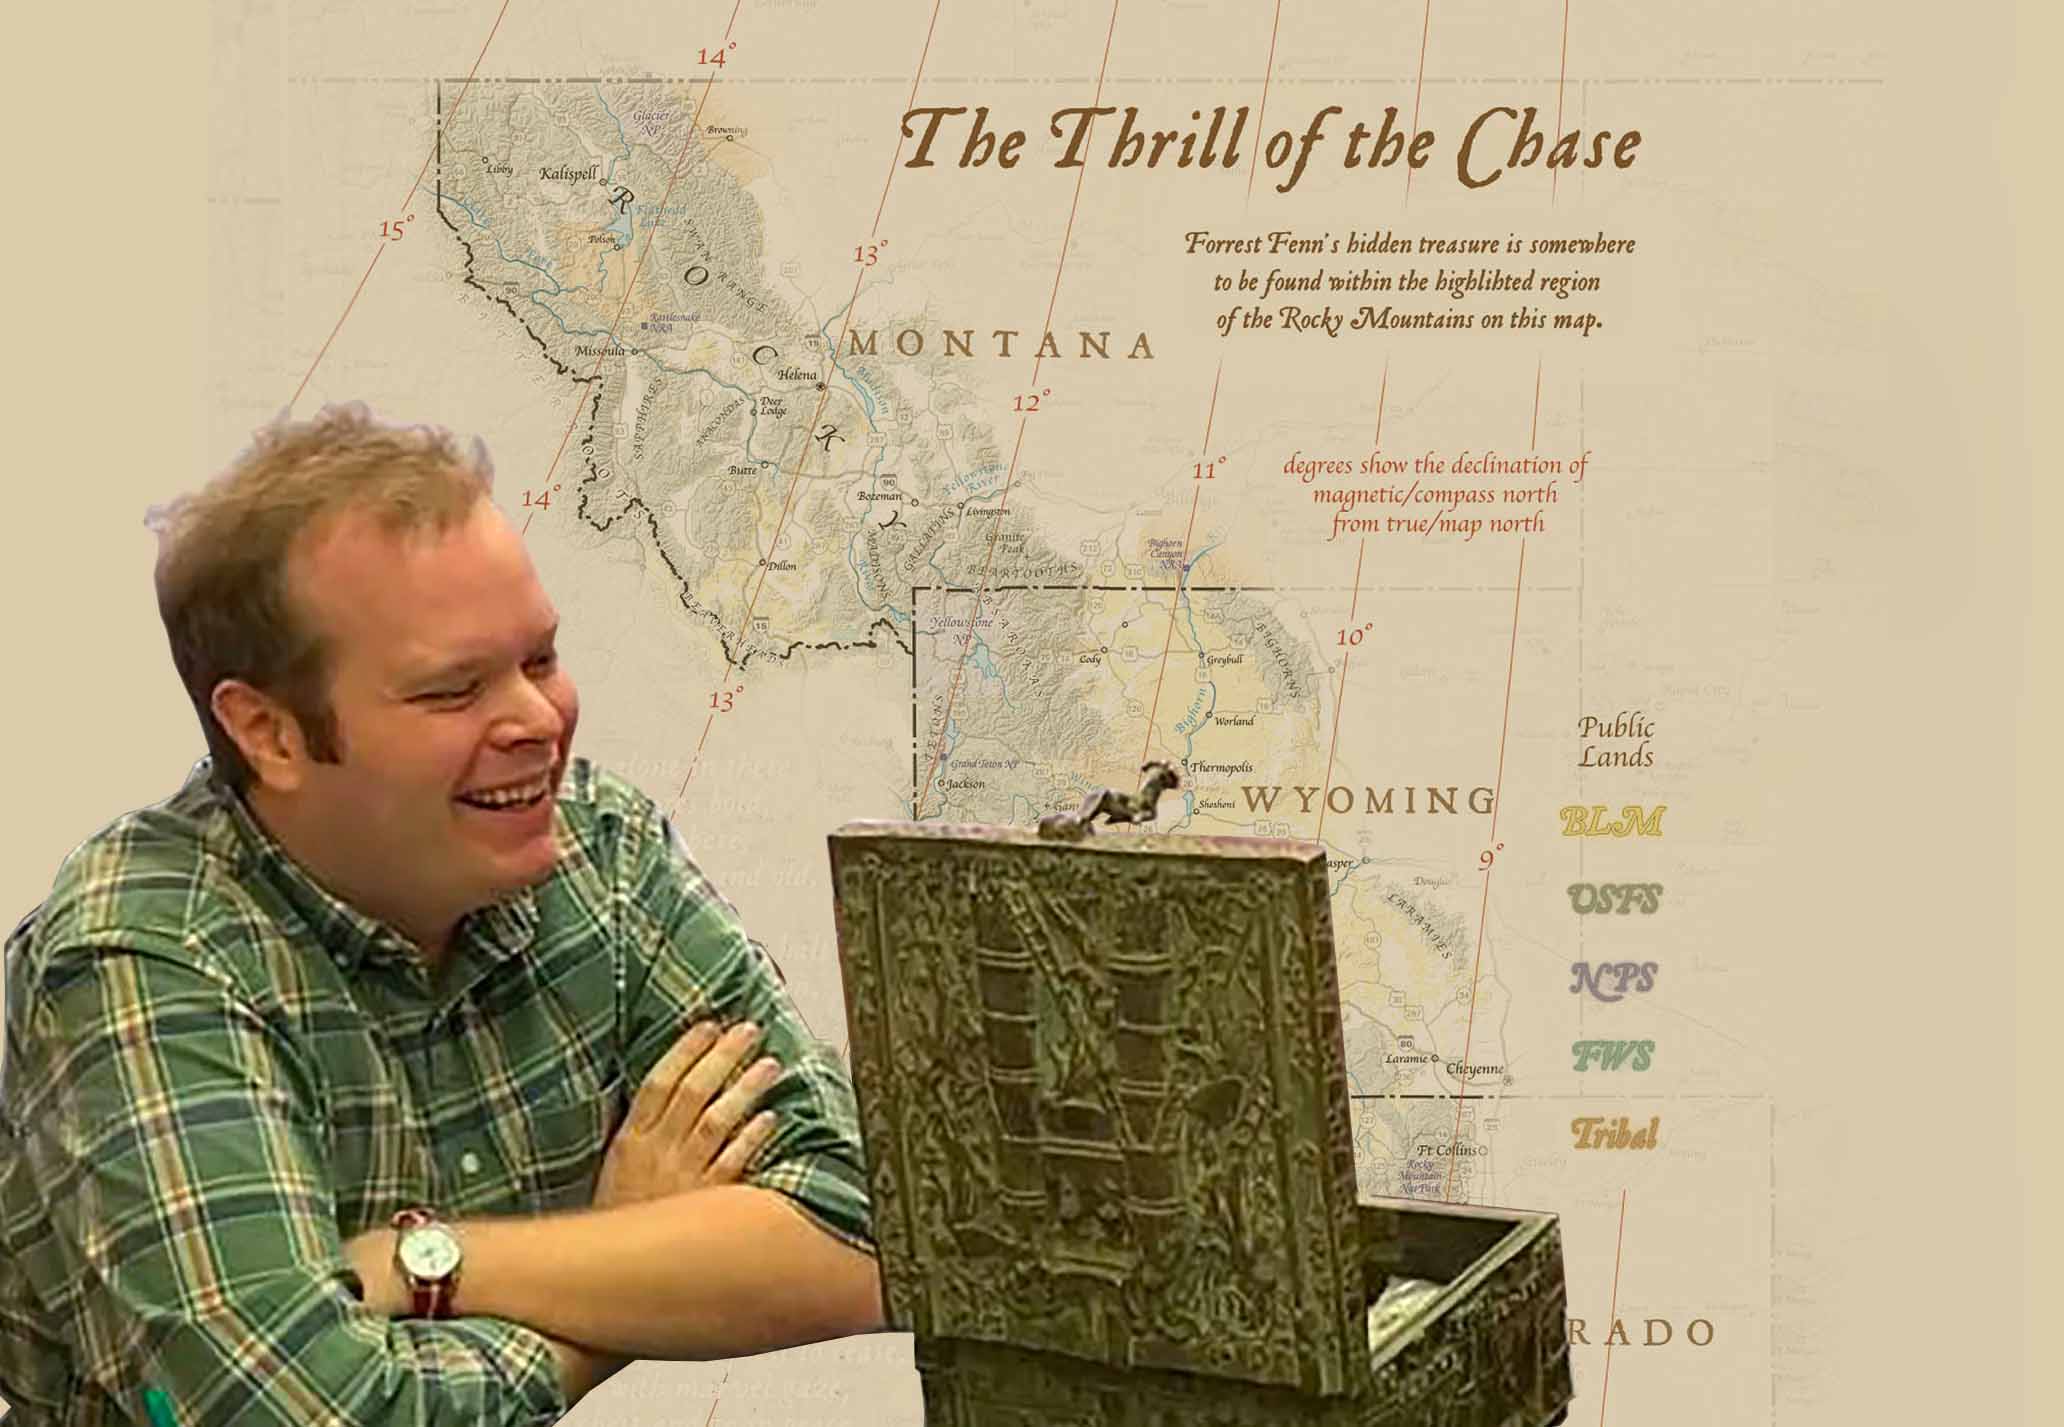 the thrill of the chase map and poem